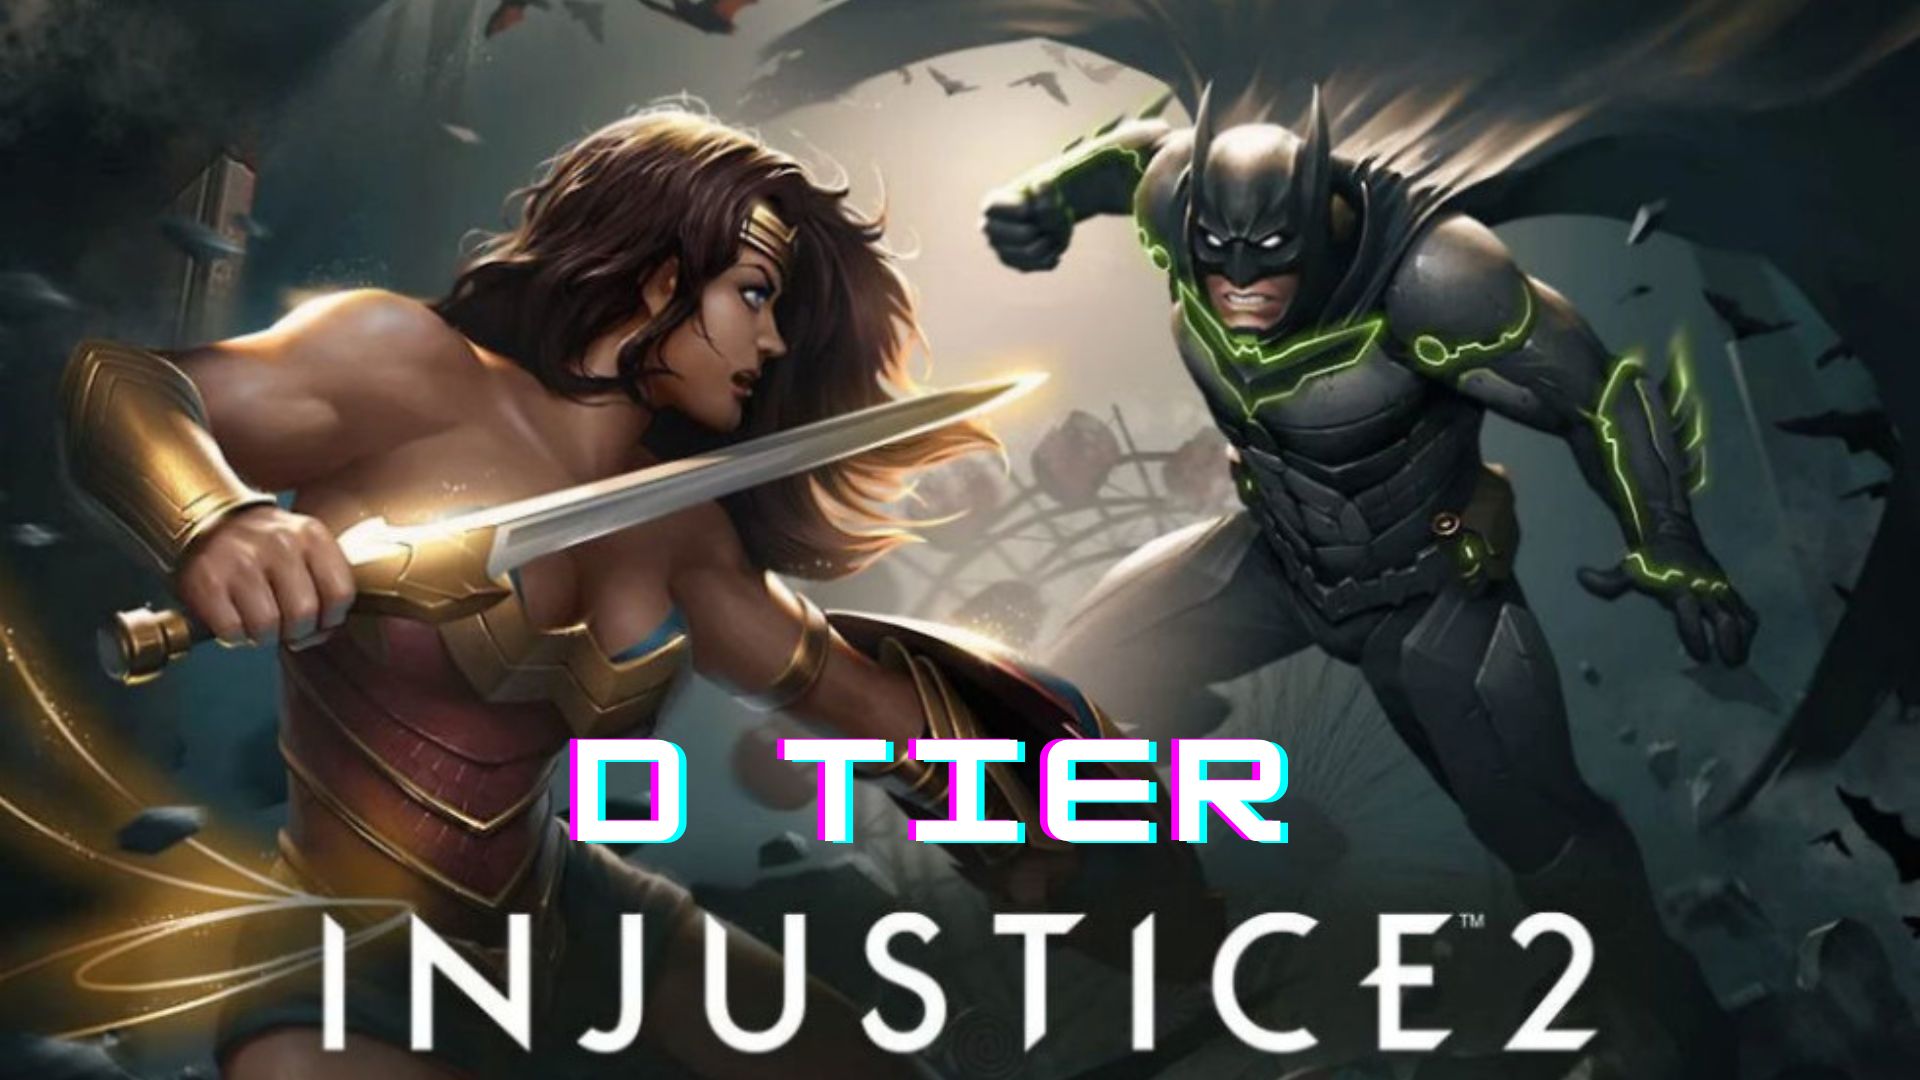 Worst characters of Injustice 2